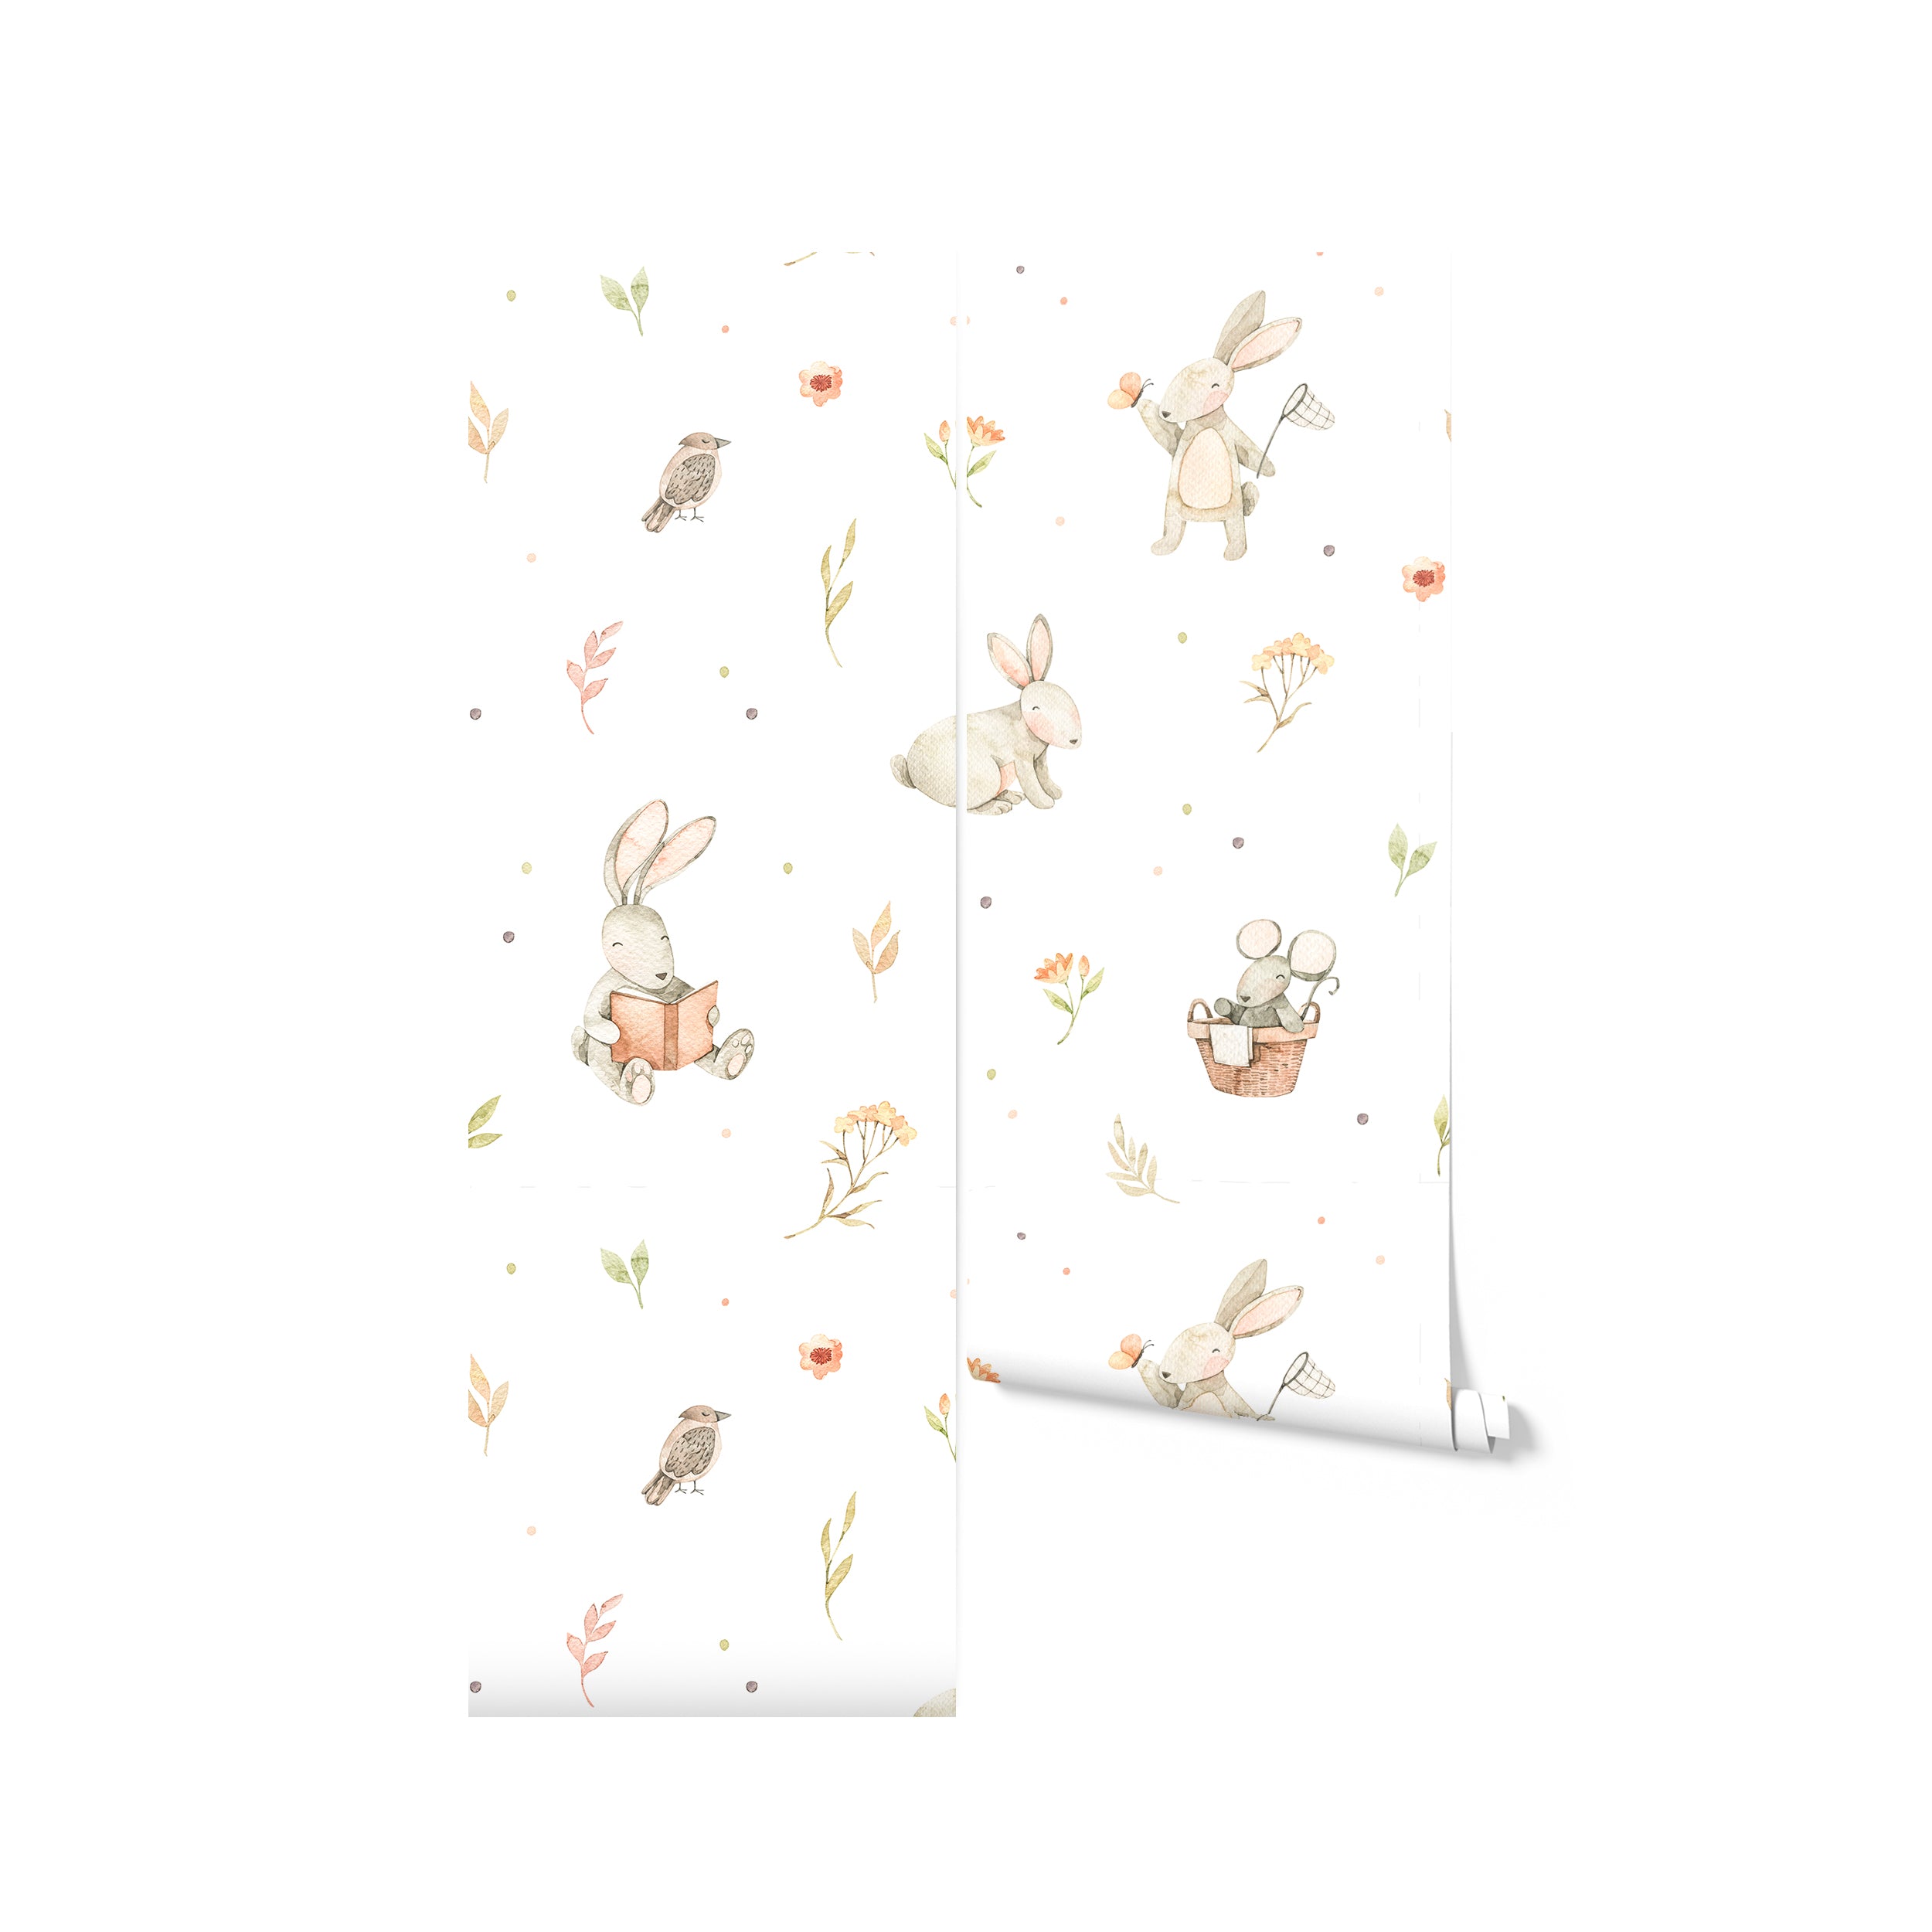 A roll of Watercolour Bunnies Wallpaper unfurling to reveal the sweet and serene pattern of watercolor bunnies amidst nature, perfect for adding a touch of gentle whimsy and storybook charm to a child’s room or nursery.